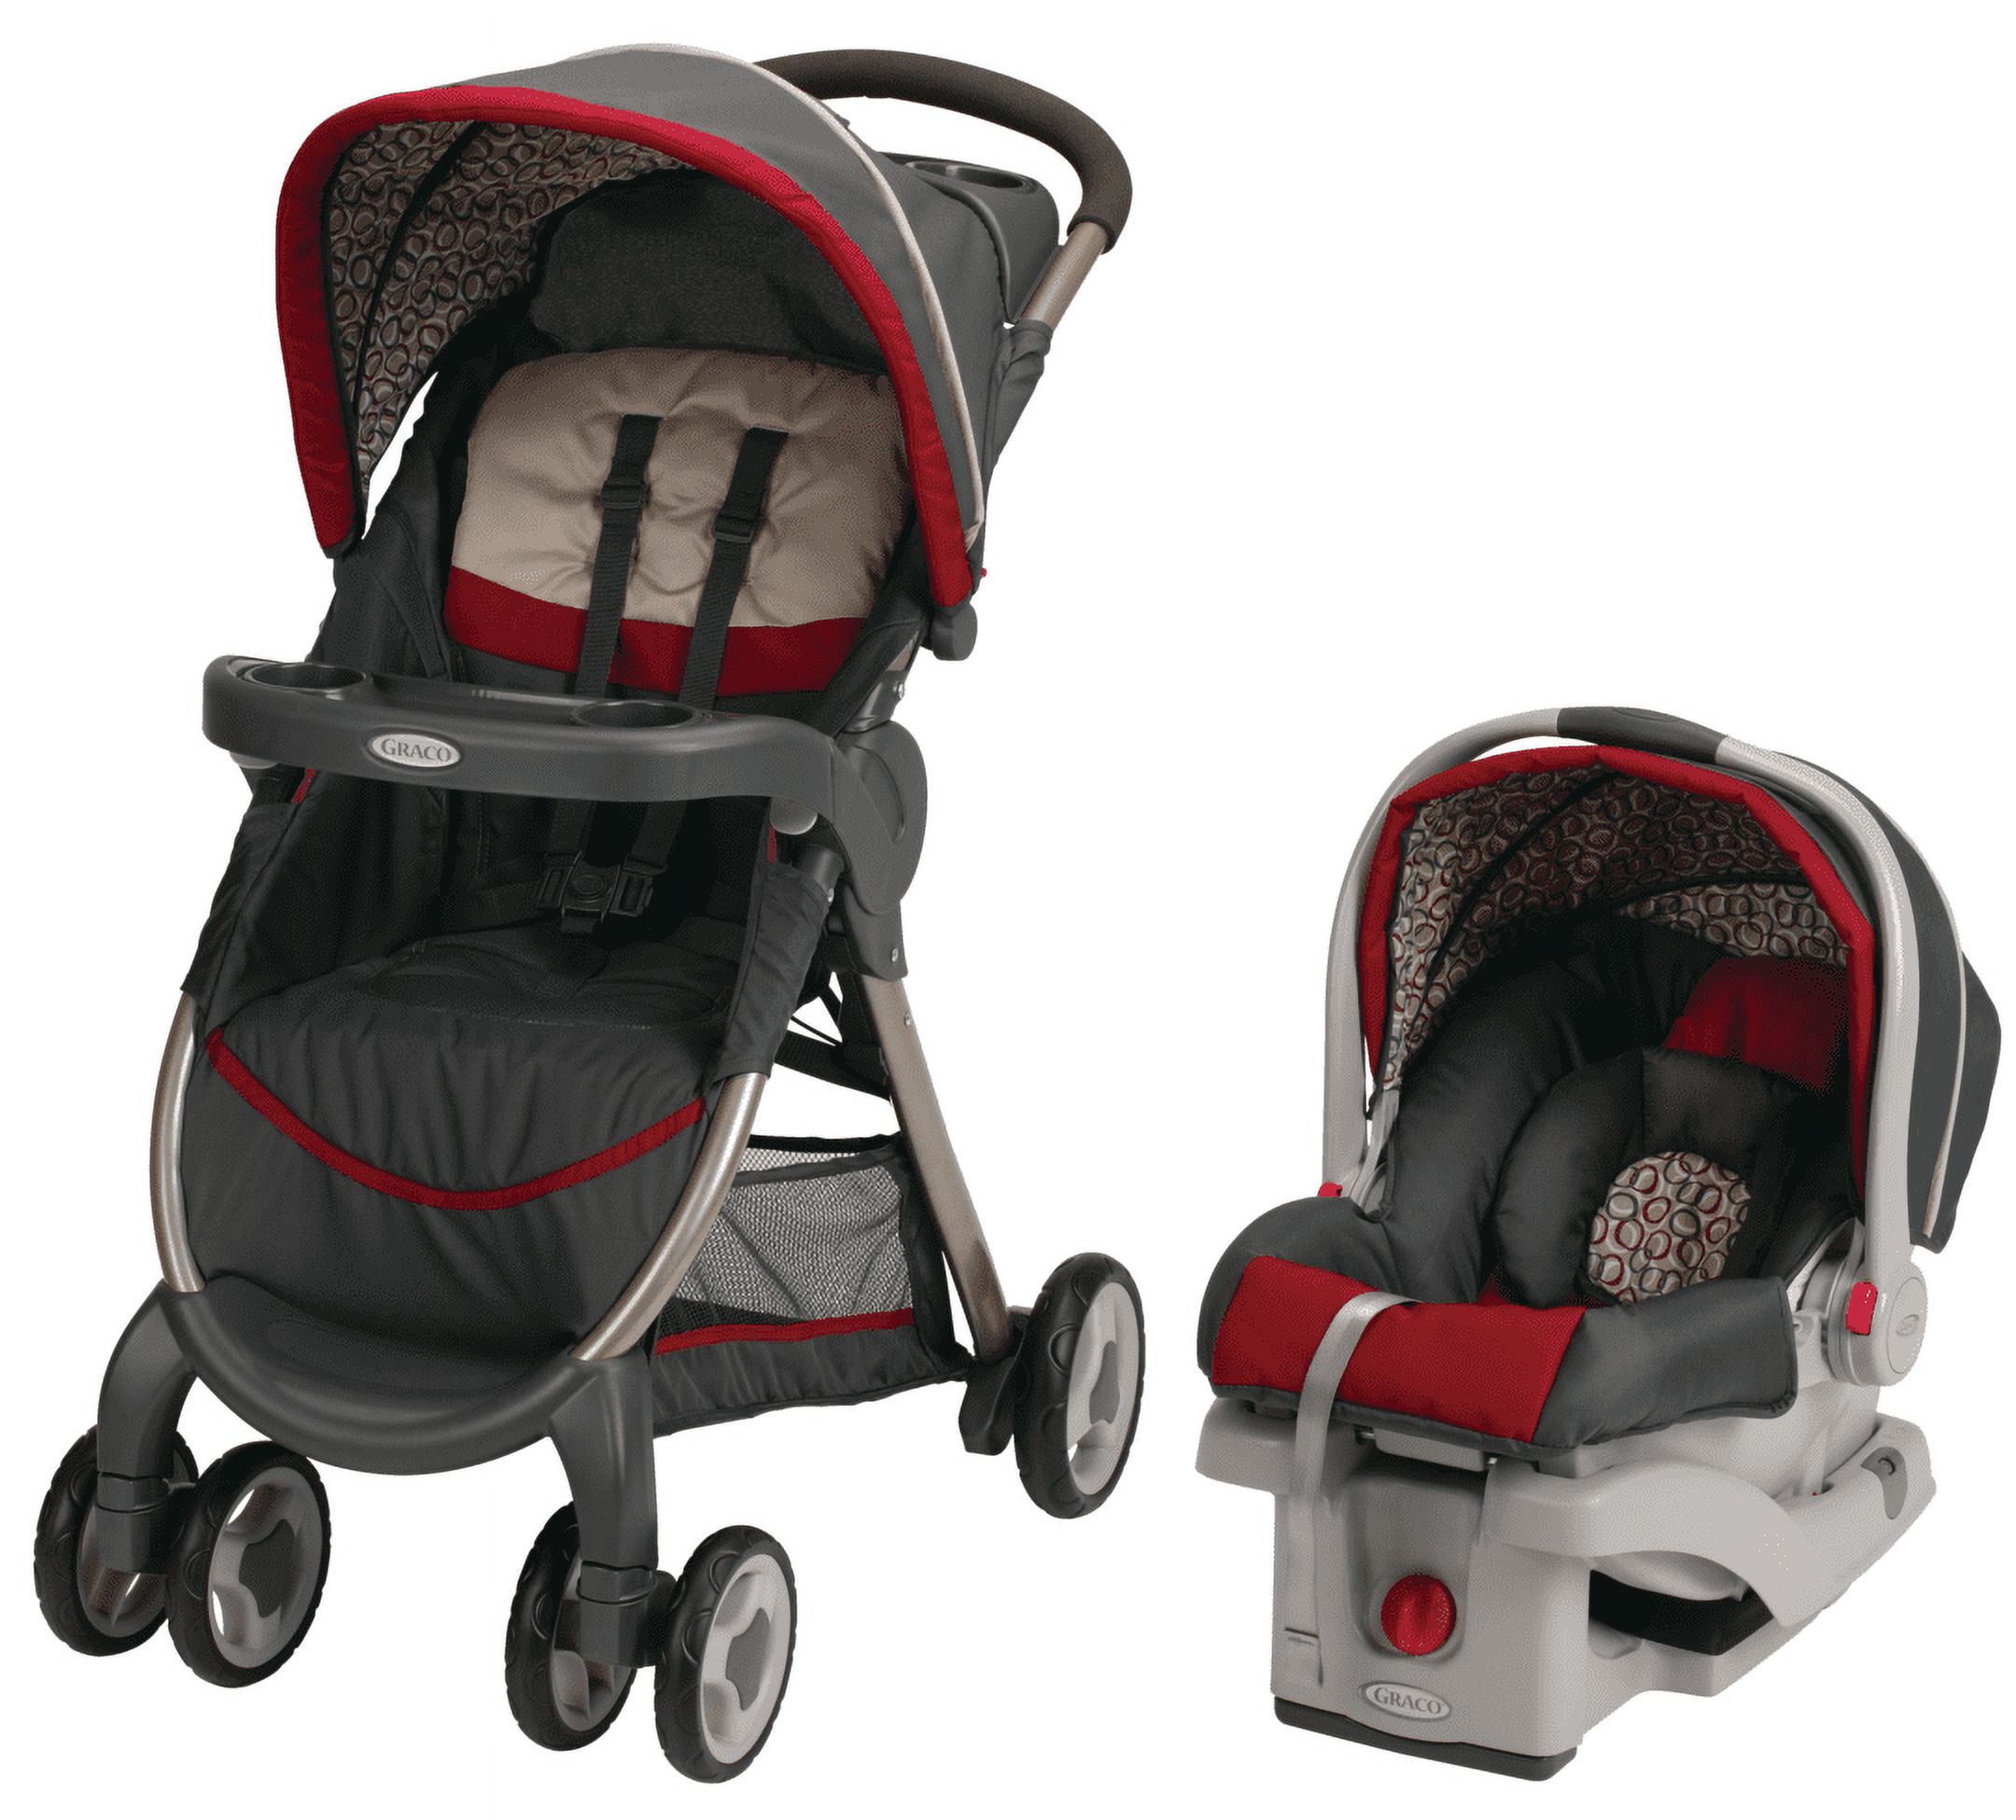 Graco FastAction Fold Click Connect Travel System, Finley - image 1 of 5